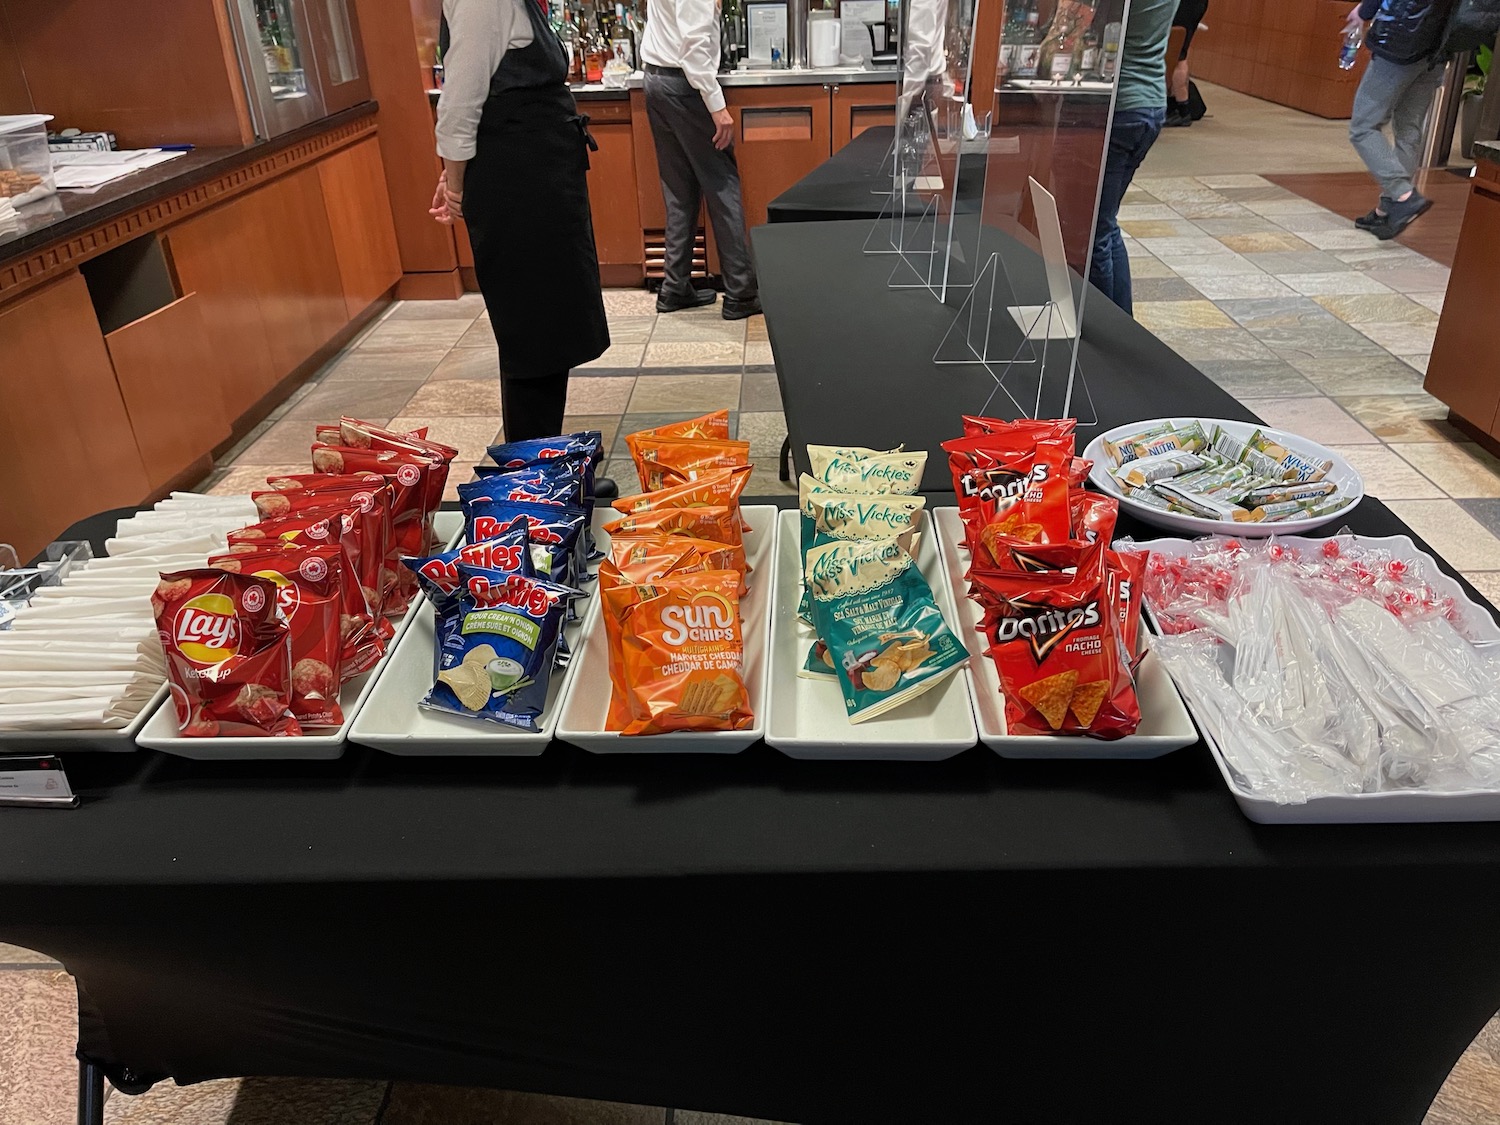 a group of people standing next to a table with snacks